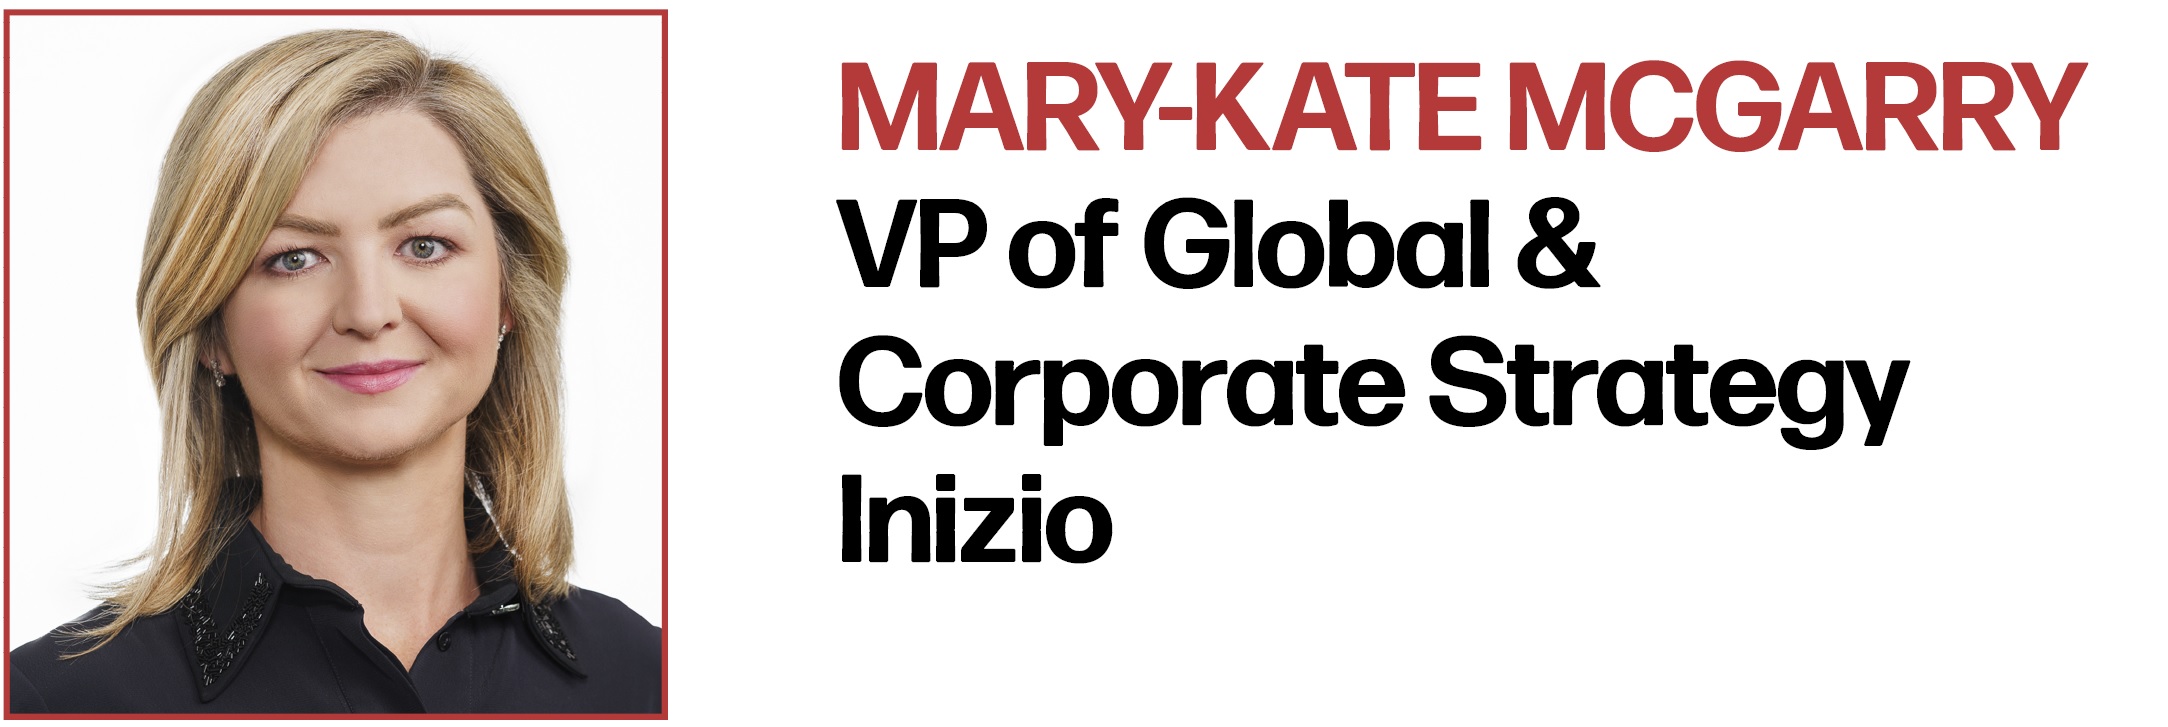 Mary-Kate McGarry VP of Global & Corporate Strategy Inizio